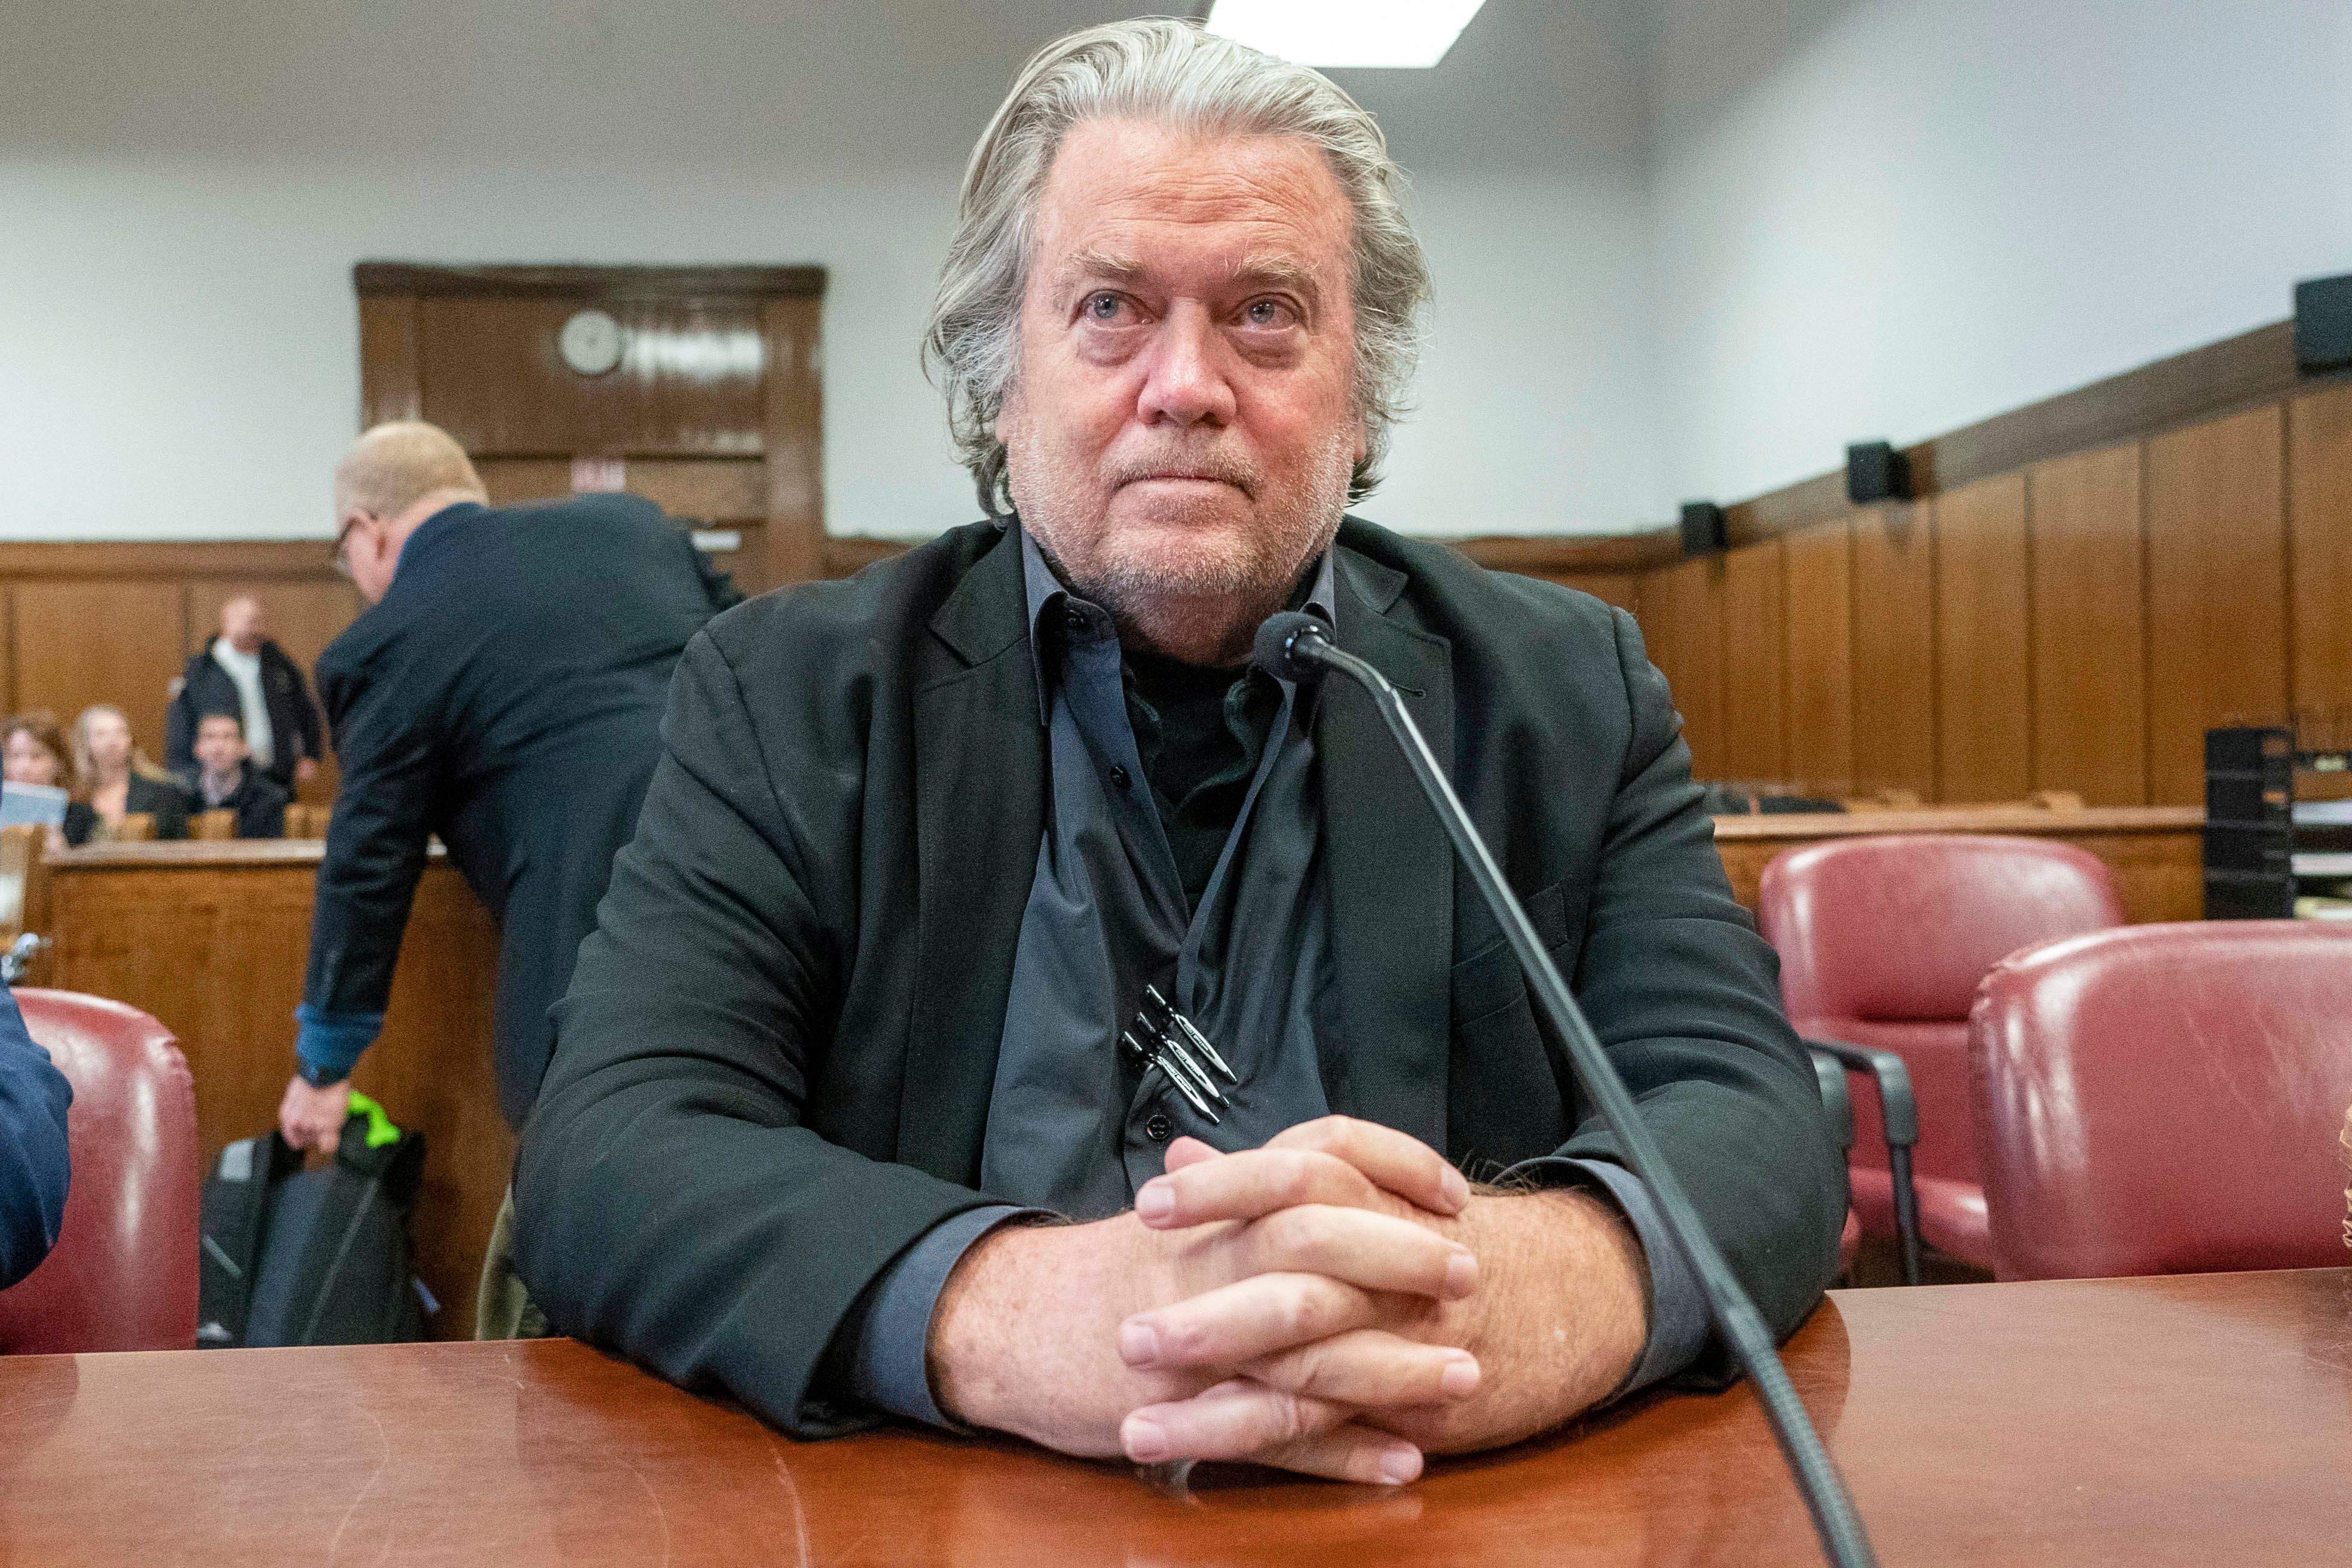 Trump ally Steve Bannon to report to federal prison to serve four-month sentence on contempt charges thumbnail